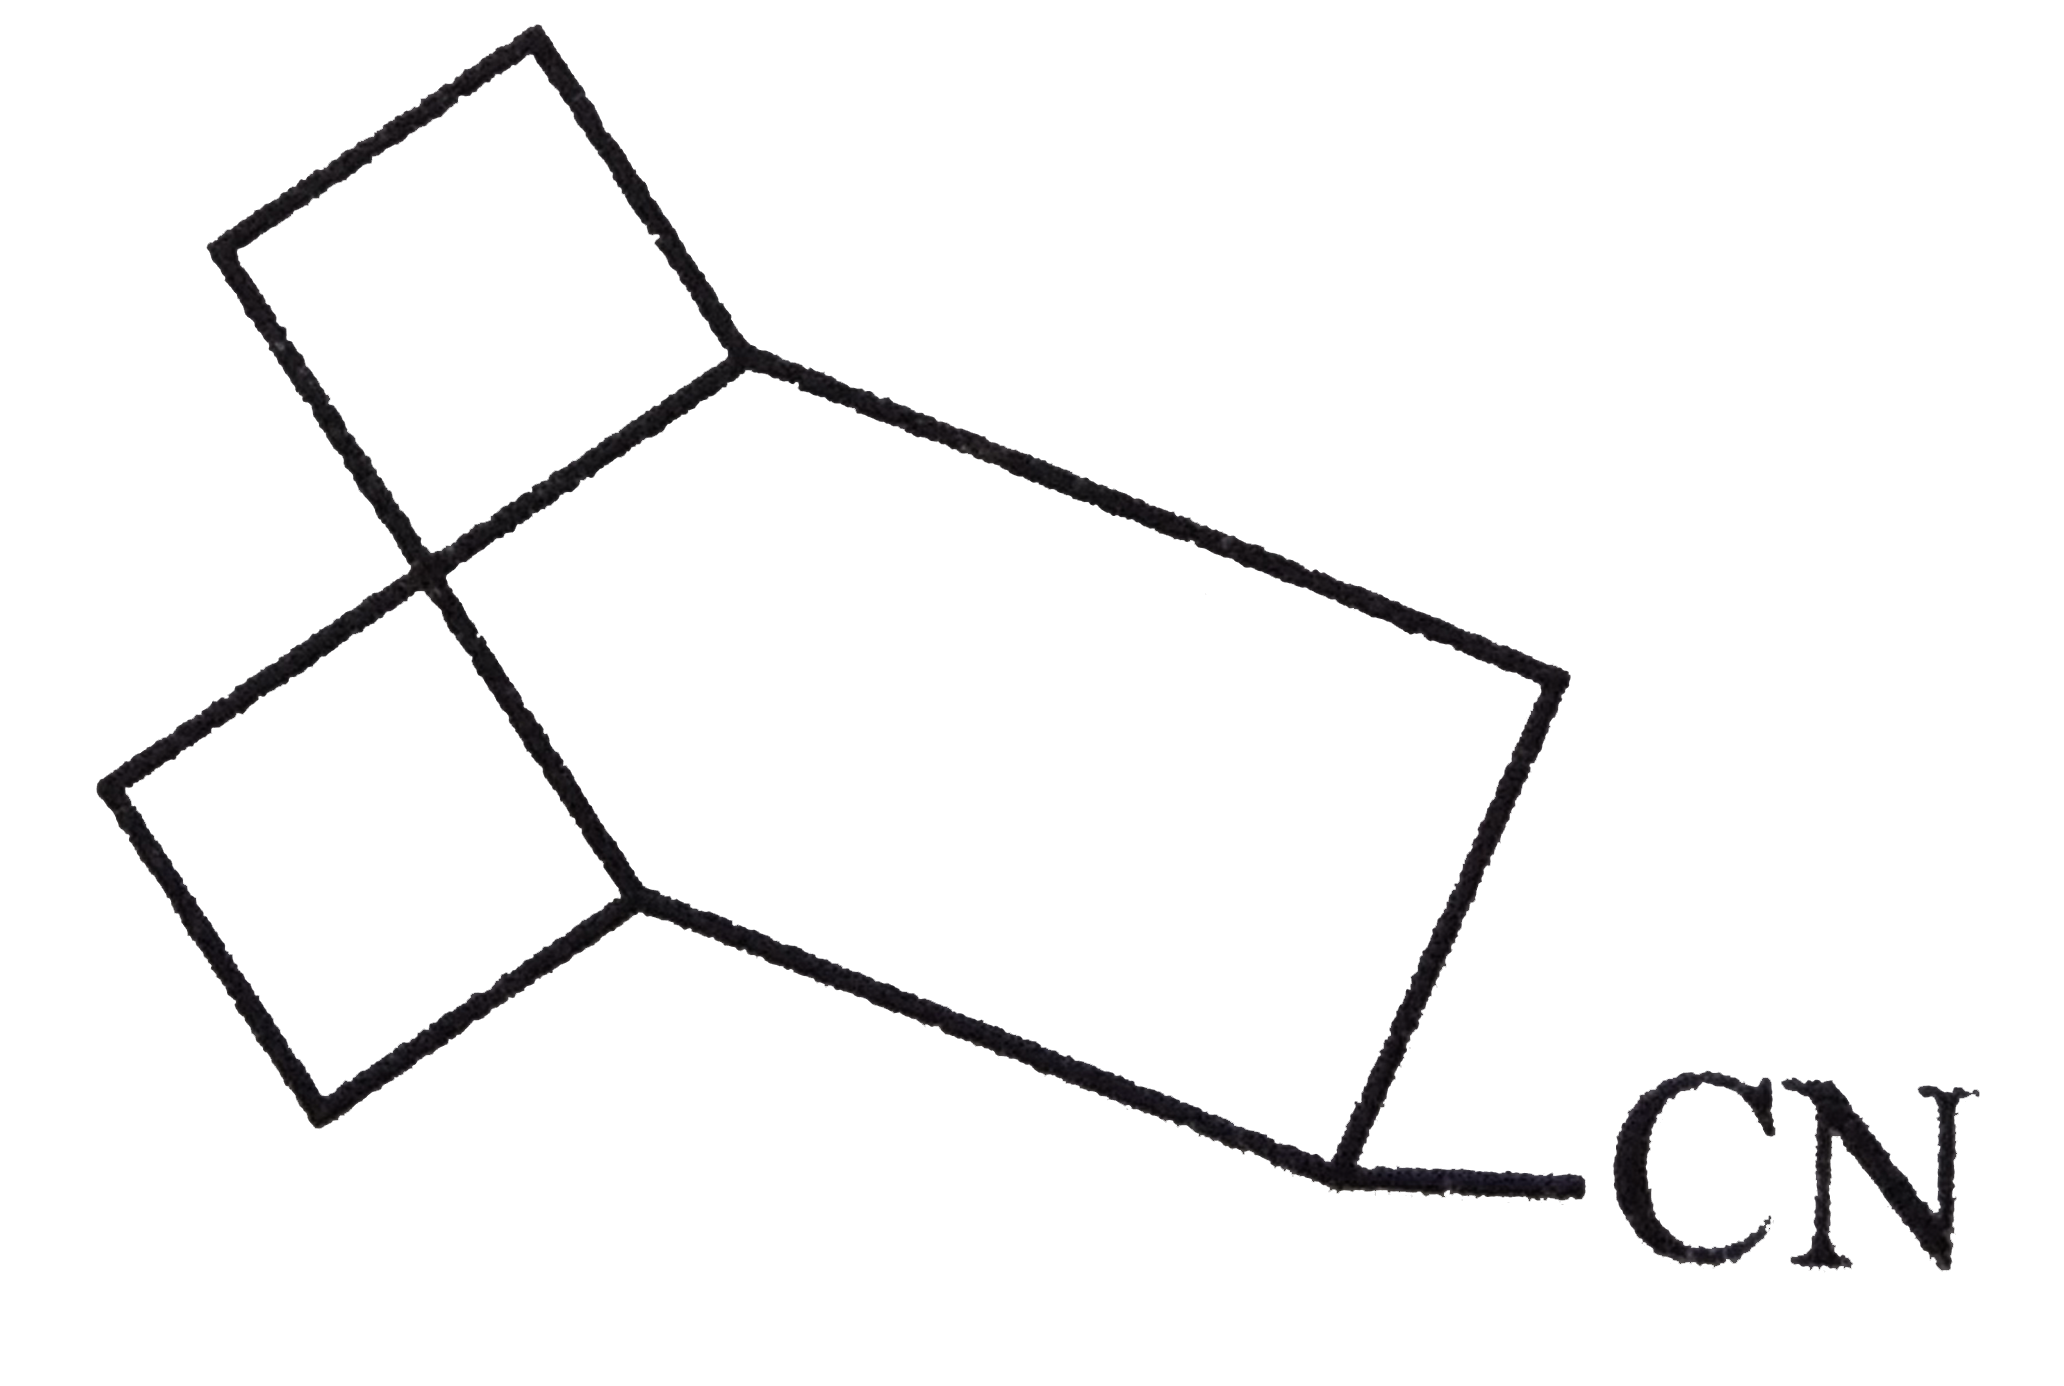 The Diels - Alder reaction between 1,3-cyclo- hexandiene and acrylonitrile gives the adduct,      Its IUPAC name is